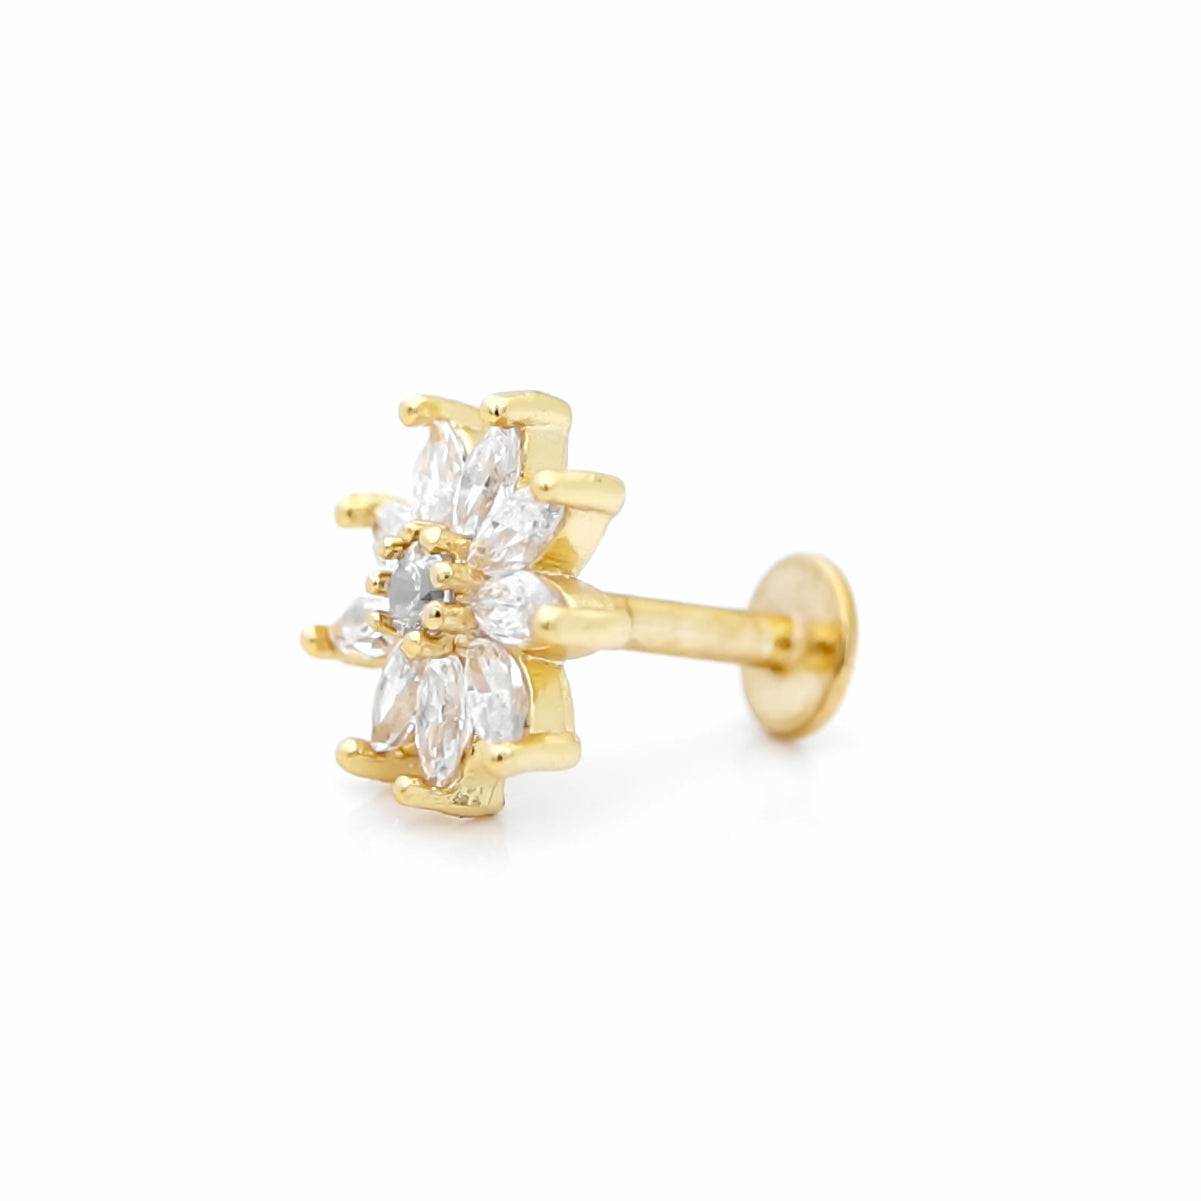 C.Z Pave Flower Cartilage Tragus Piercing Earring - Gold-Body Piercing Jewellery, Cartilage, Cubic Zirconia, earrings, Jewellery, Tragus, Women's Earrings, Women's Jewellery-TG0024-g4-Glitters